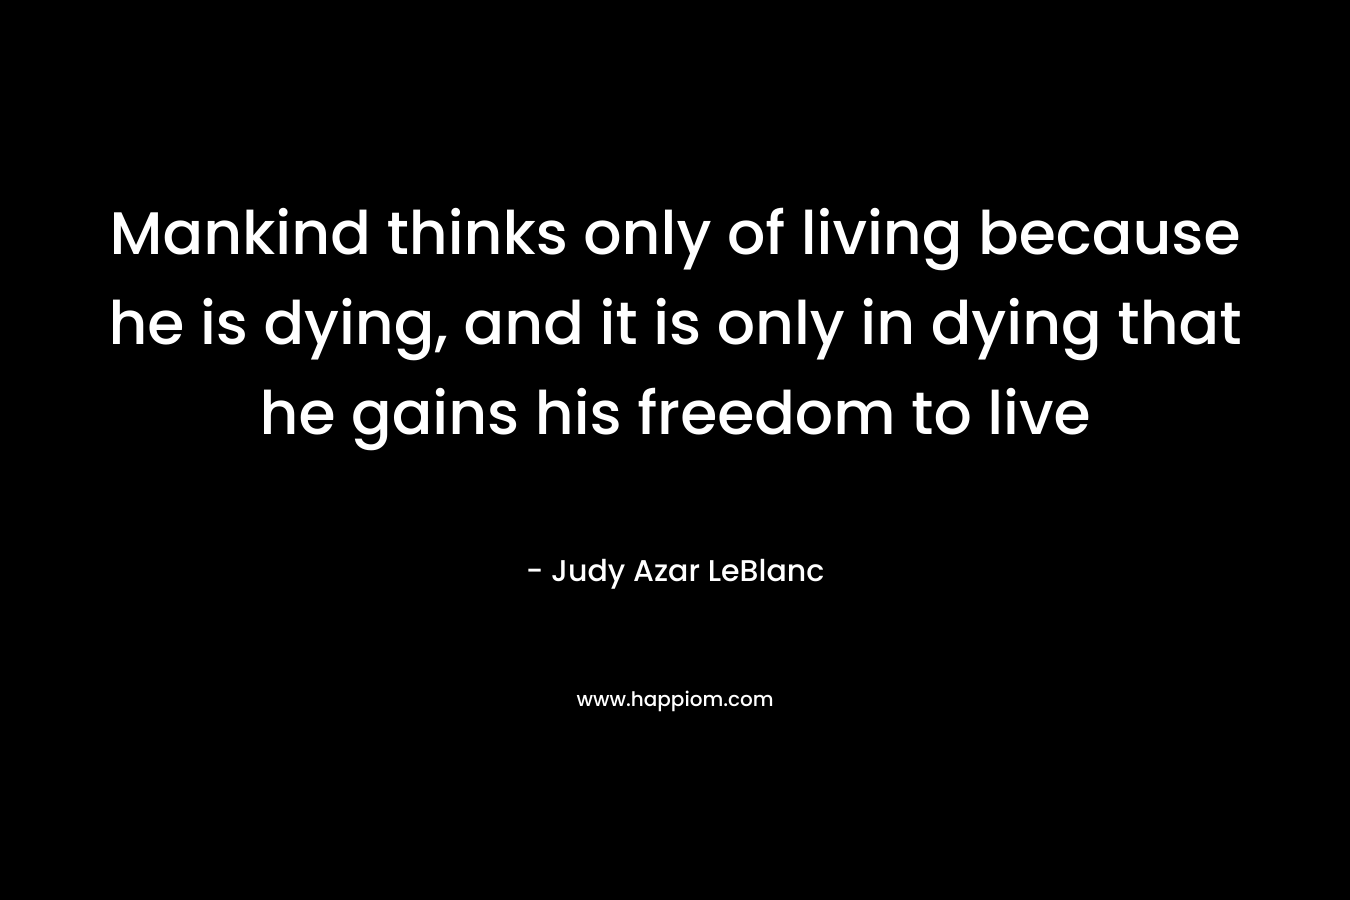 Mankind thinks only of living because he is dying, and it is only in dying that he gains his freedom to live